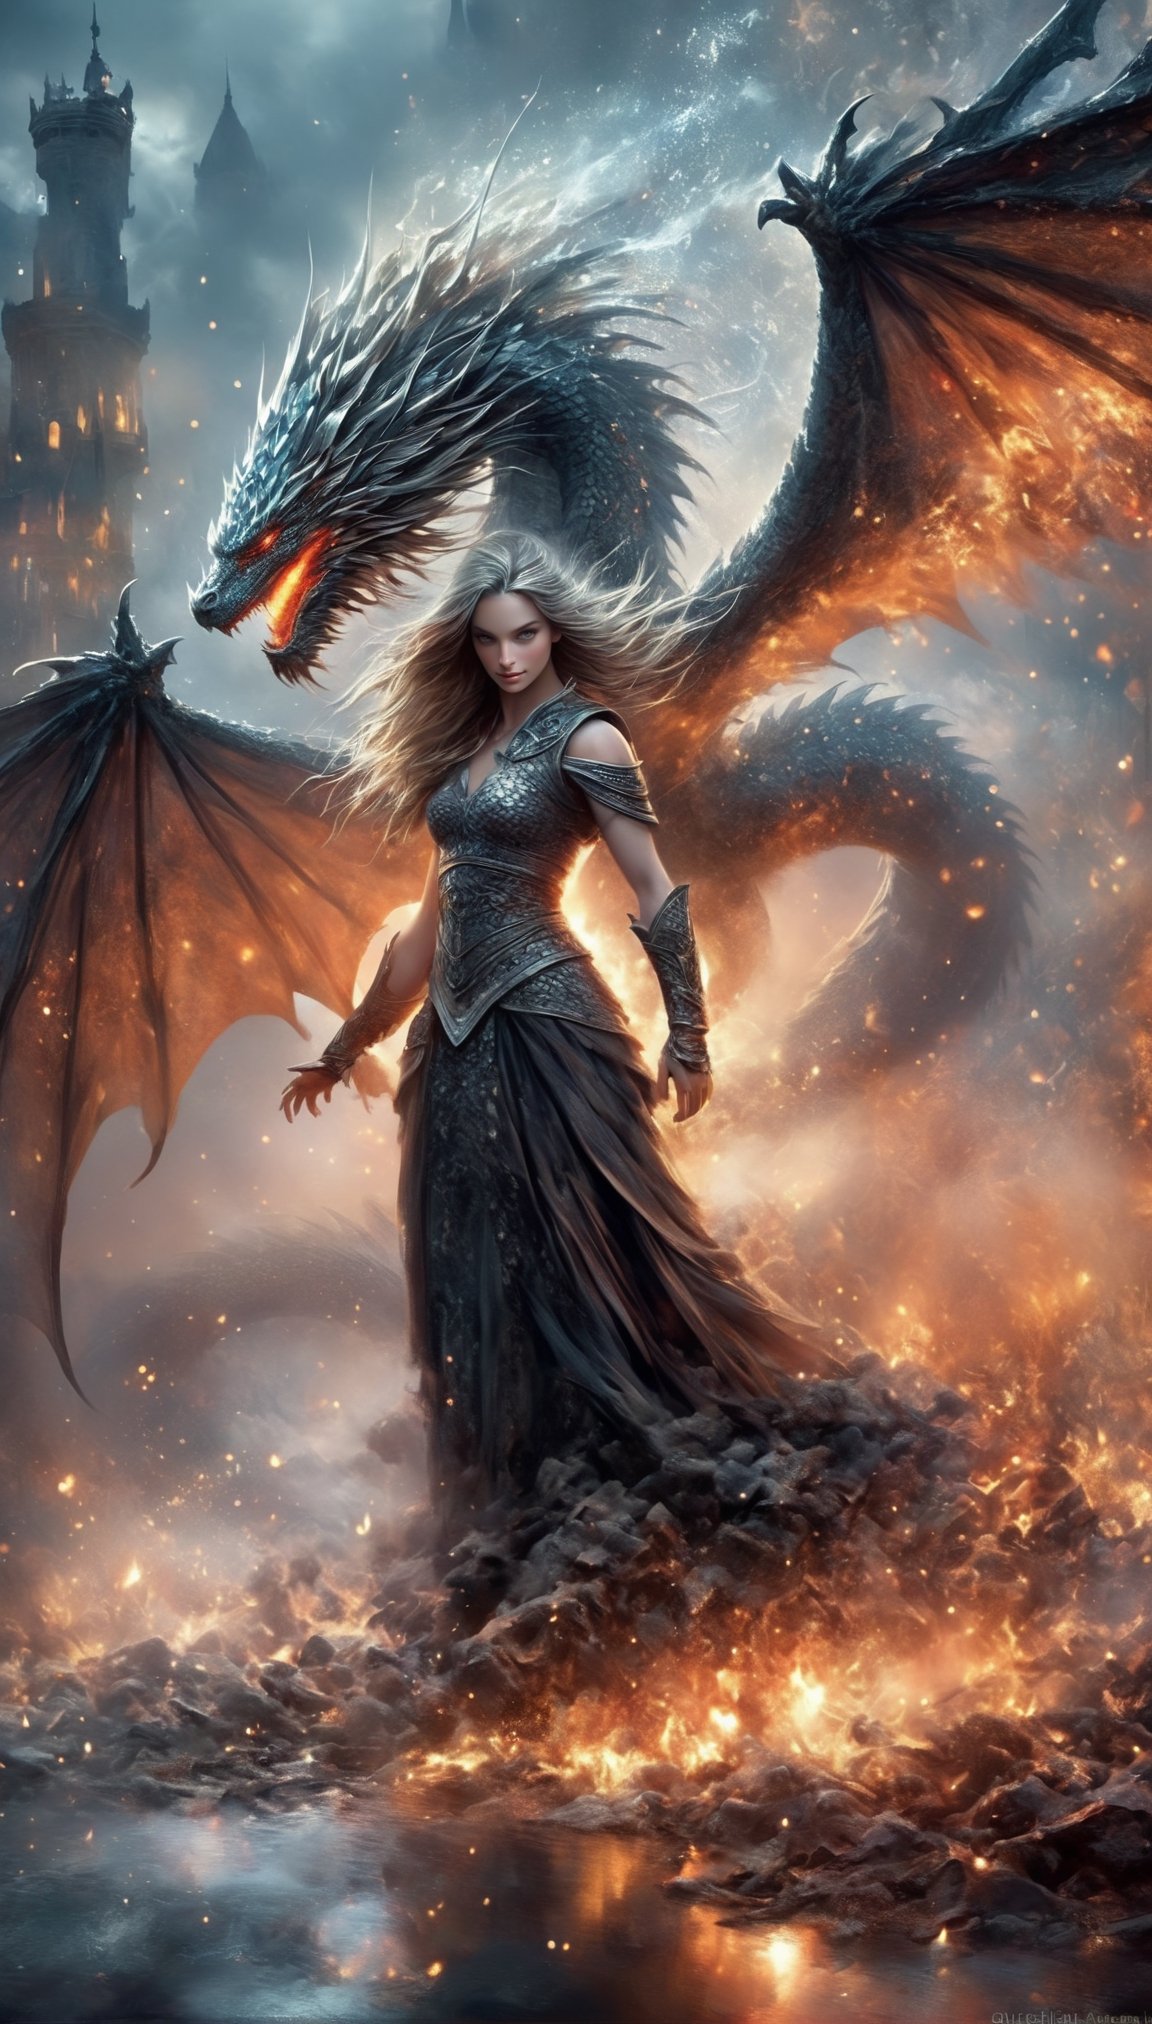 "Dark romance fantasy, ((a woman warrior poised in front of a glittering fire dragon that stands behind her)), standing above a battlefield, chaotic embers", fierce pose, walking through conquered rubble, dragonscales, sharp focus, fantasy armor, eldritch, draconic horned helm, Masterpiece, Intricate, Insanely Detailed, Art by lois van baarle, todd lockwood, chris rallis, anna dittmann, Kim Jung Gi, Gregory Crewdson, Yoji Shinkawa, Guy Denning, Textured!!!!, Chiaroscuro!!, actionpainting, best quality, action acene, masterpiece,LegendDarkFantasy,ellafreya,renny the insta girl,DragonConfetti2024_XL,greg rutkowski